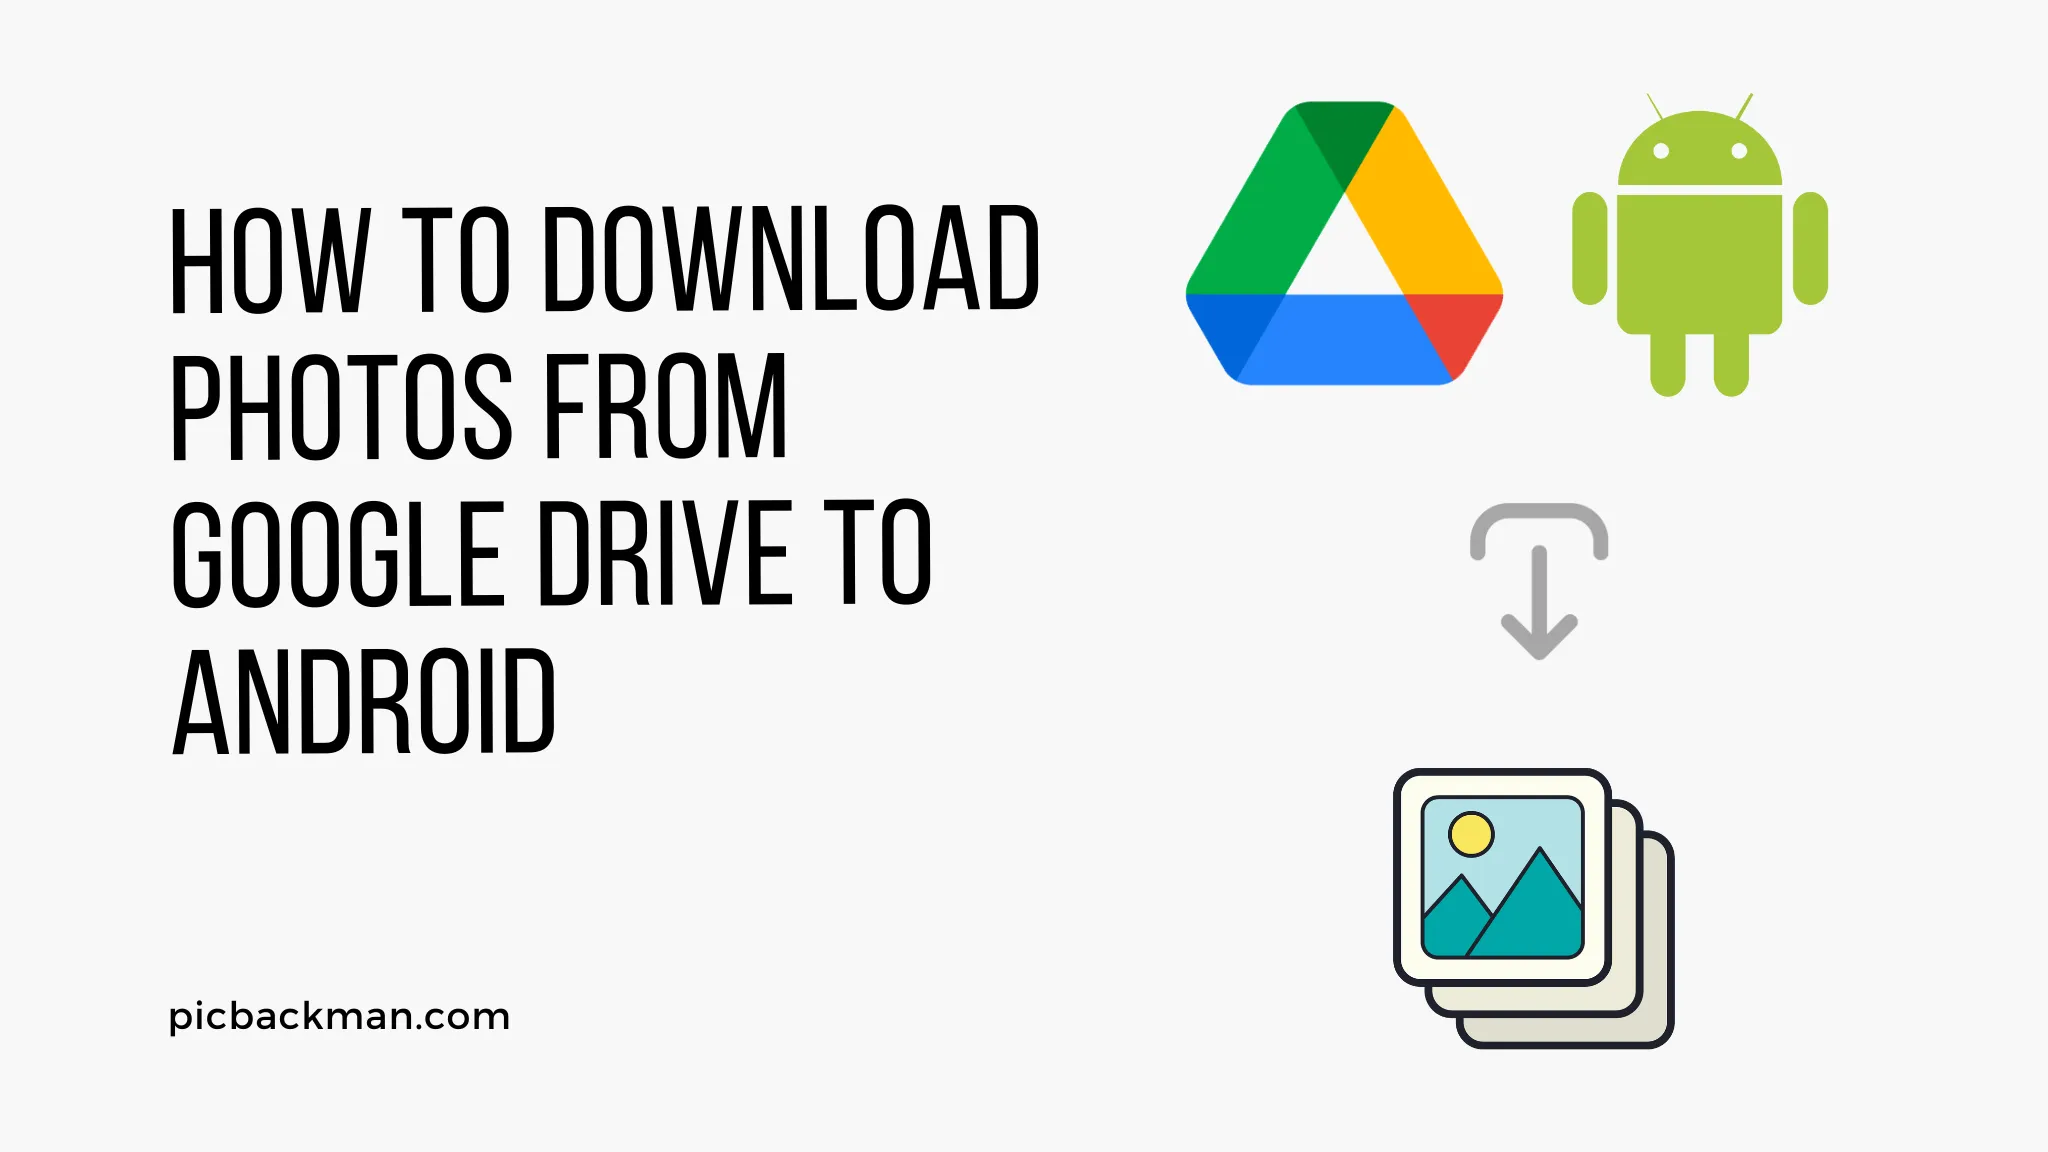 How to Download Photos from Google Drive to Android